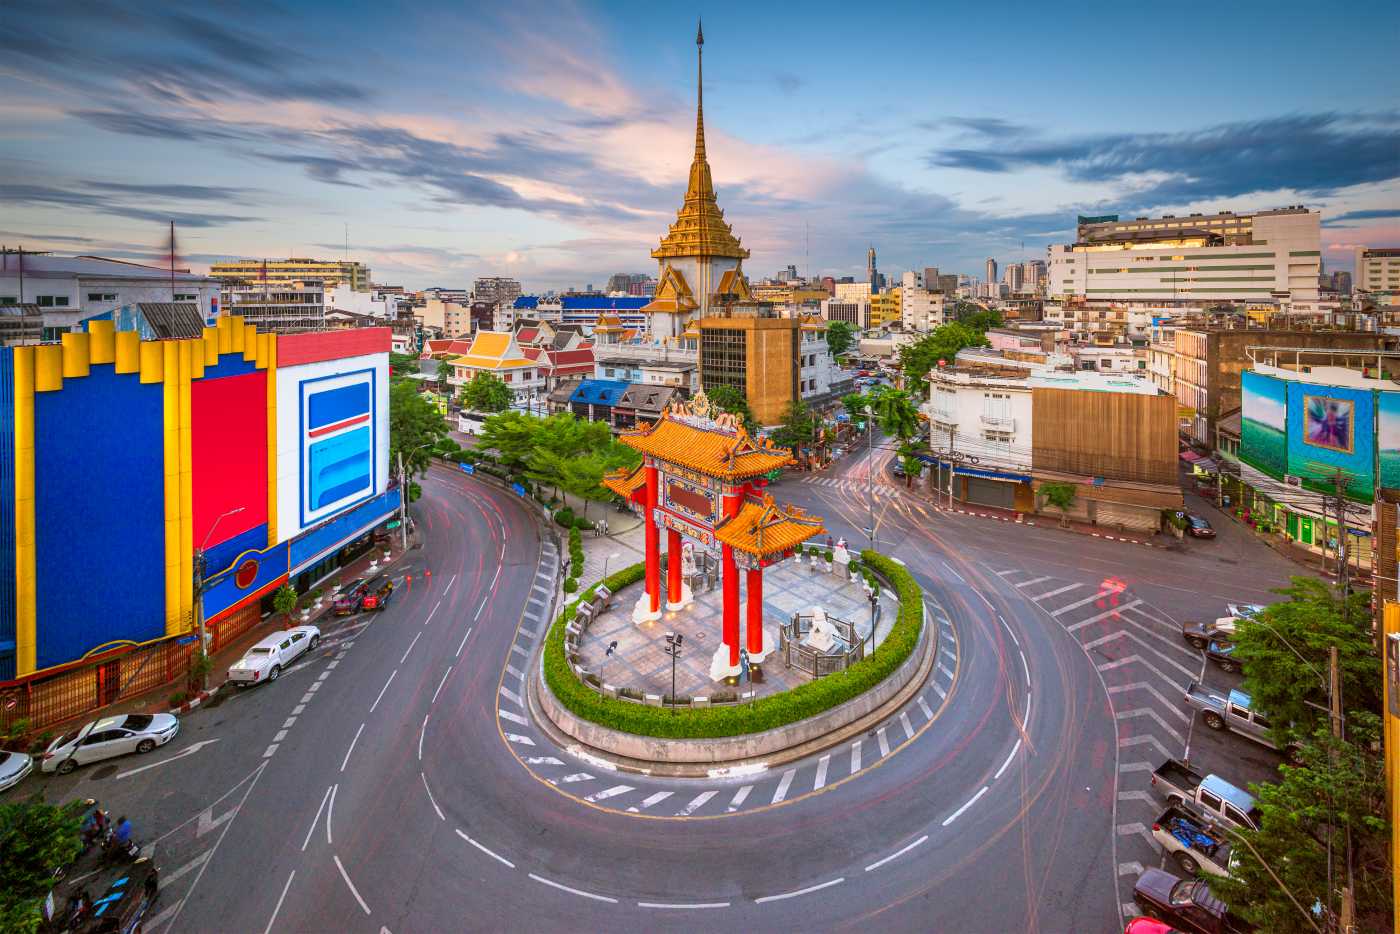 Vibrant image depicting the bustling atmosphere and rich cultural diversity of Chinatown in Bangkok